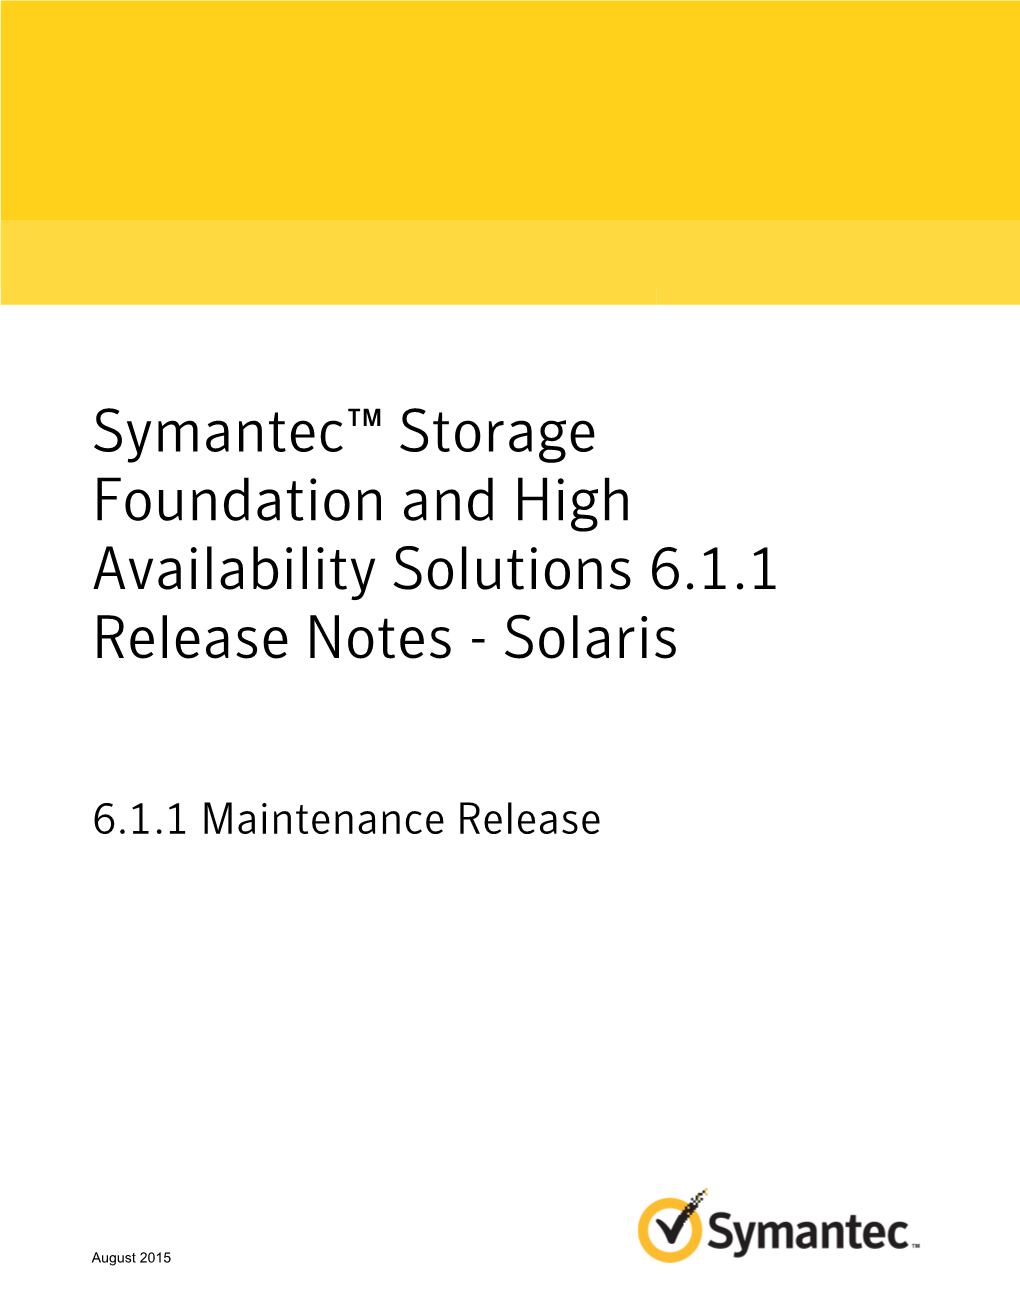 Symantec™ Storage Foundation and High Availability Solutions 6.1.1 Release Notes - Solaris